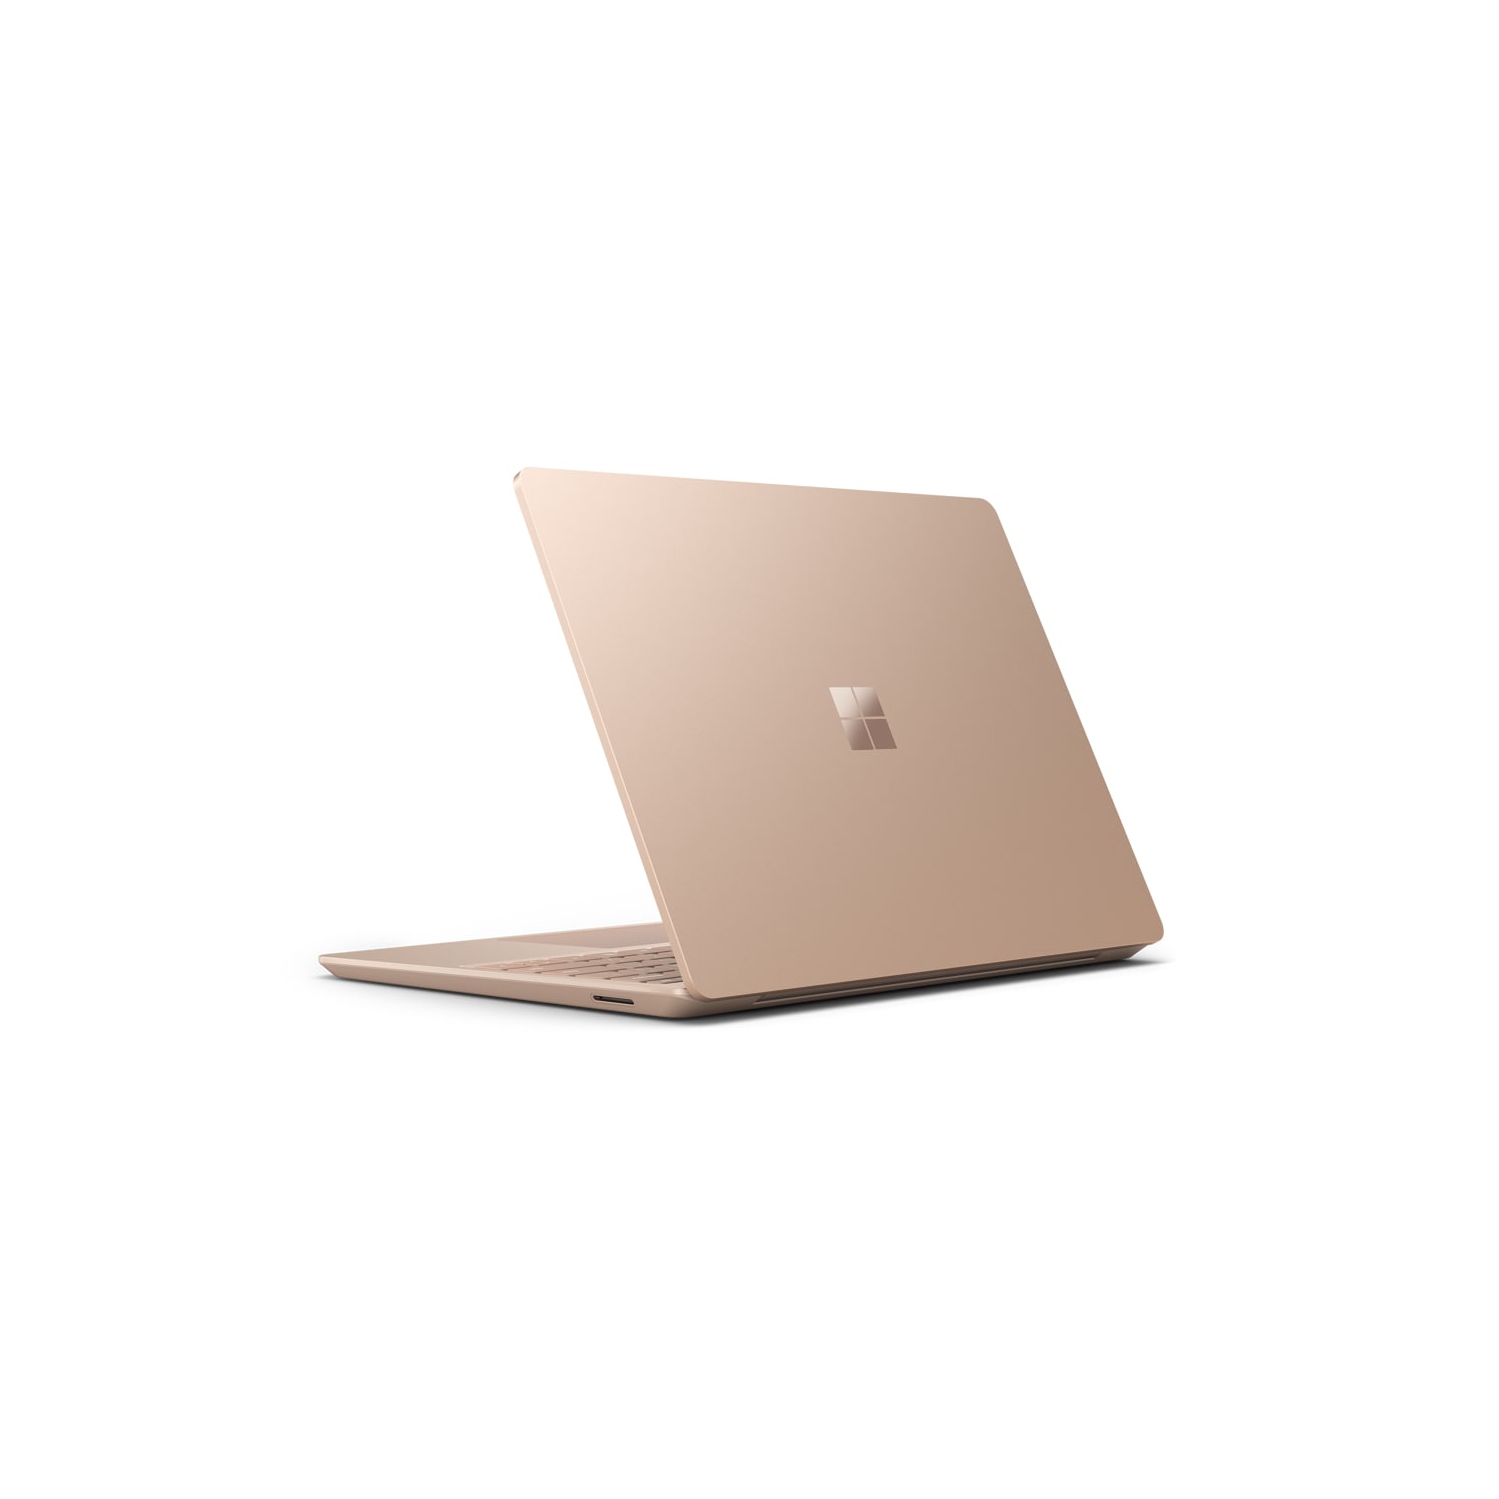 Refurbished (Excellent) Microsoft Surface Laptop Go 2 - Intel Core 